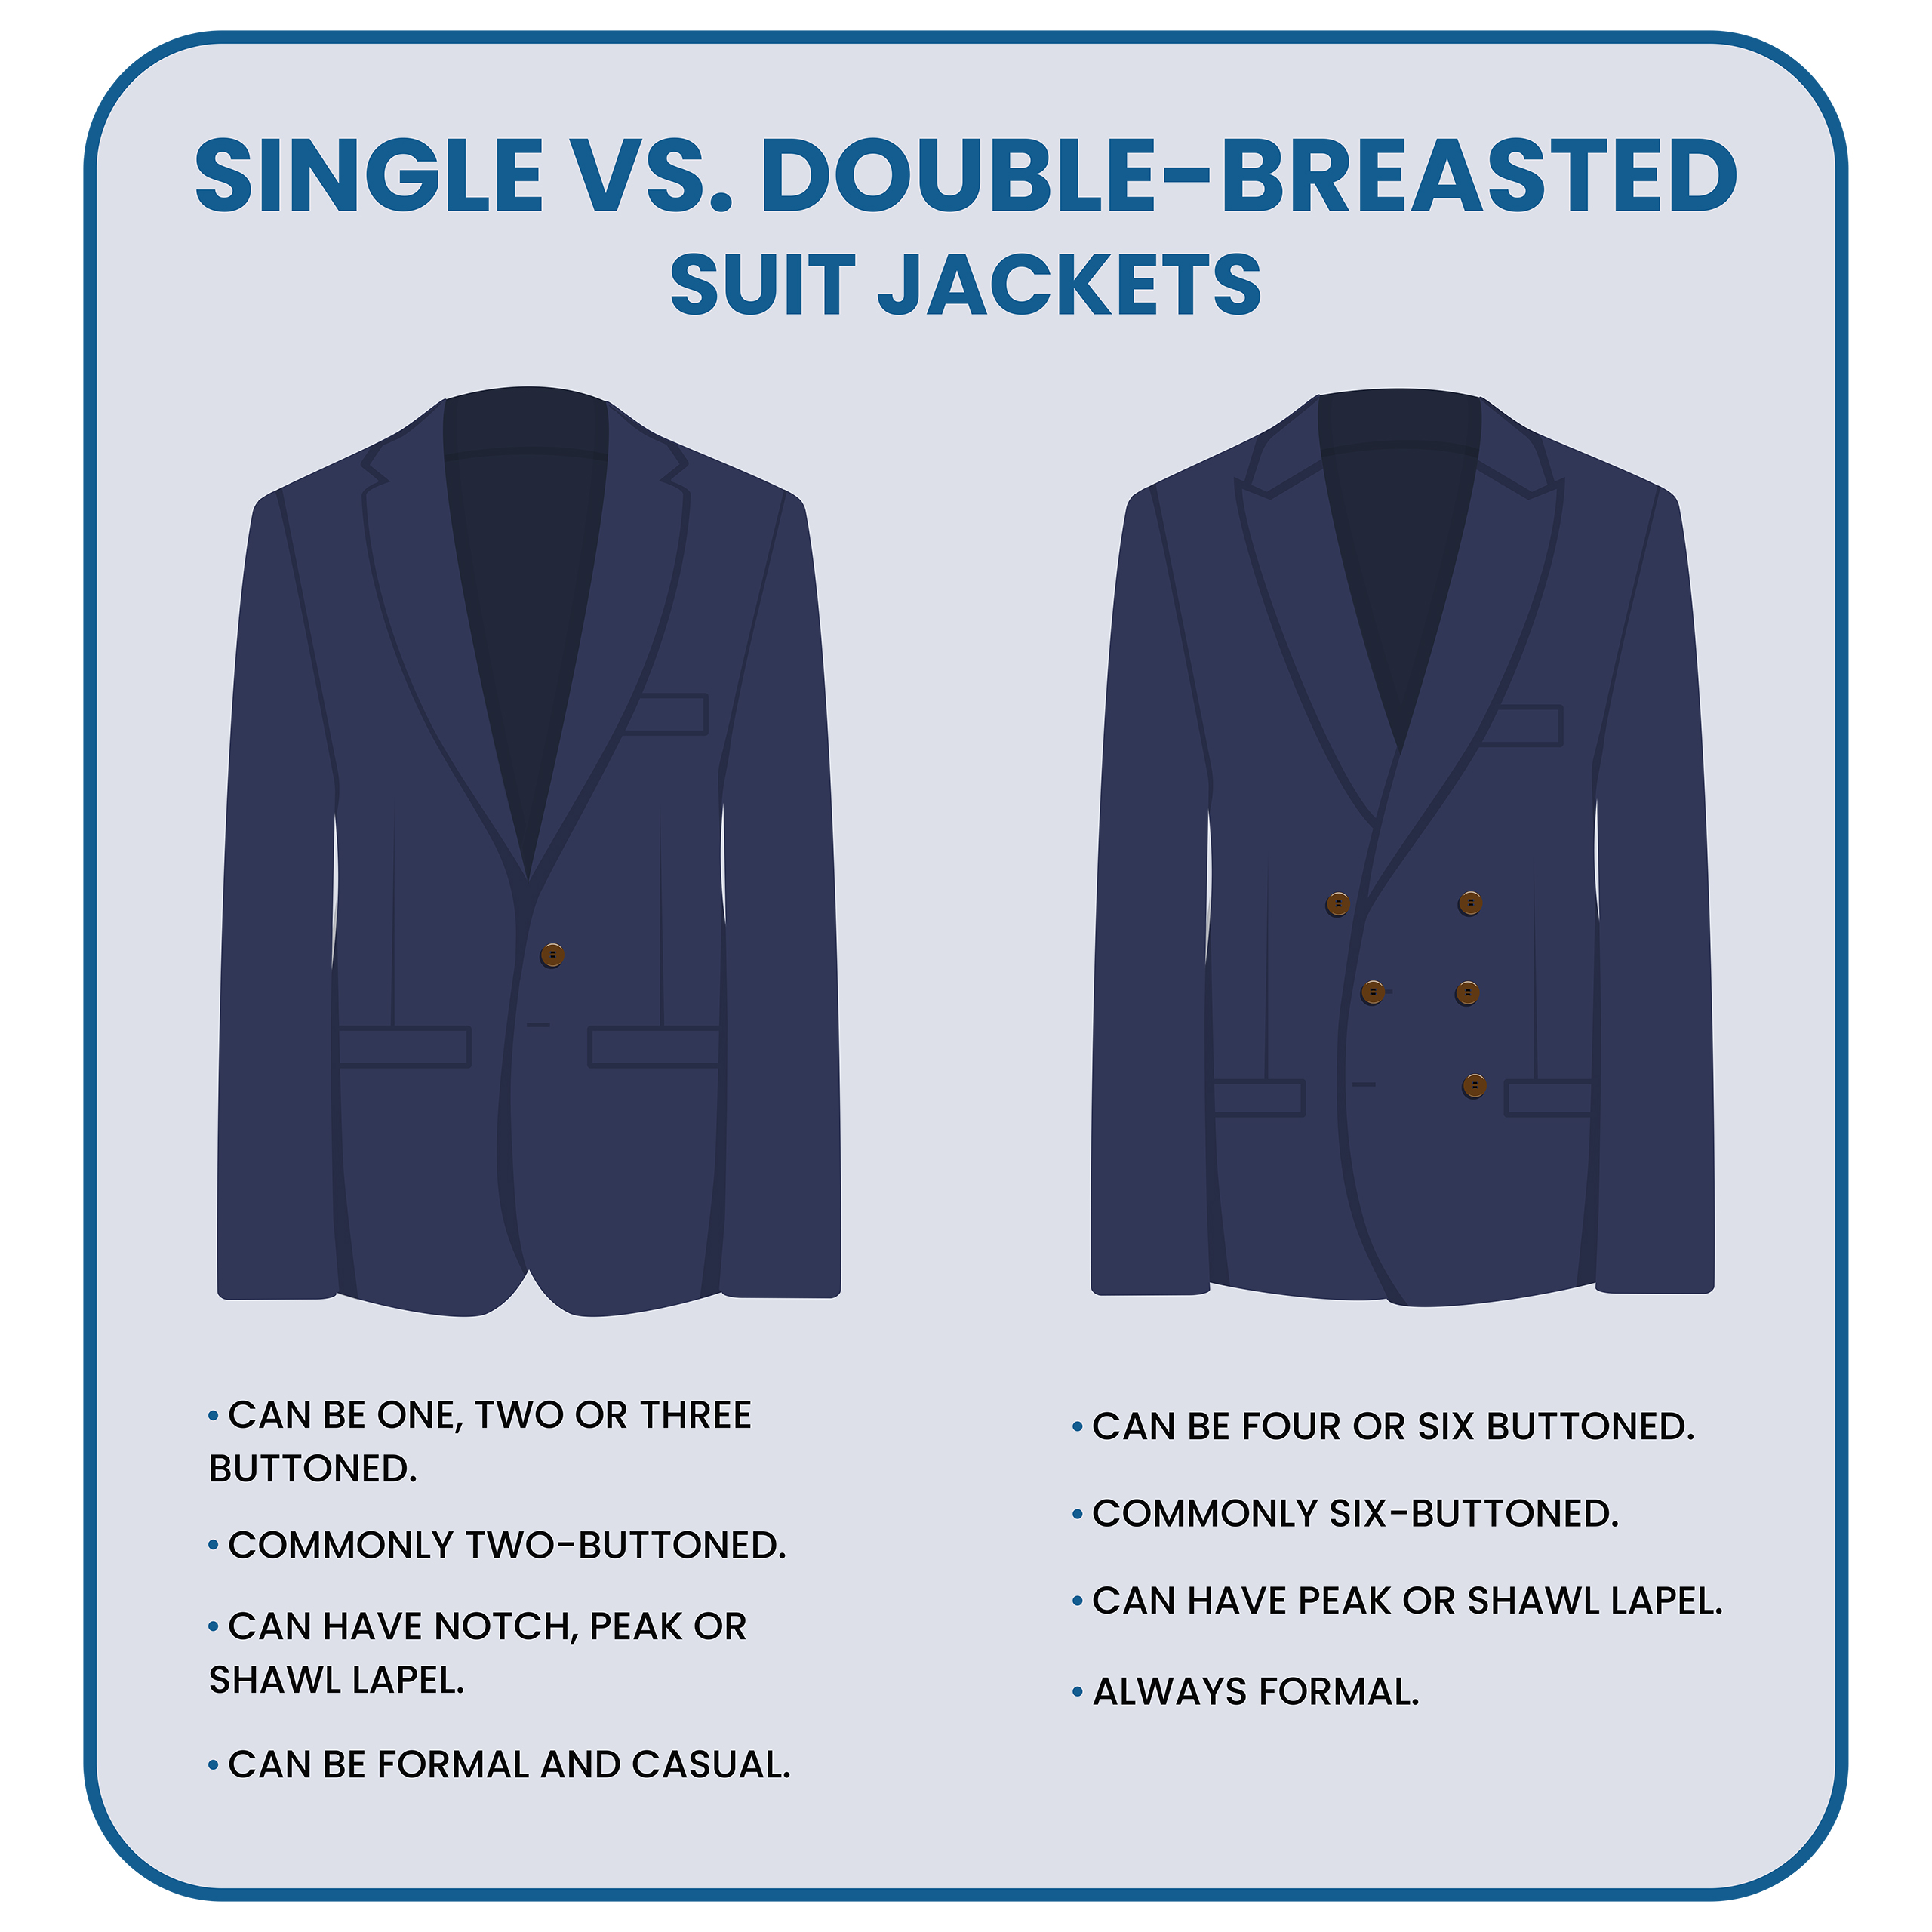 Three Totally Different Ways To Style One Classic Suit